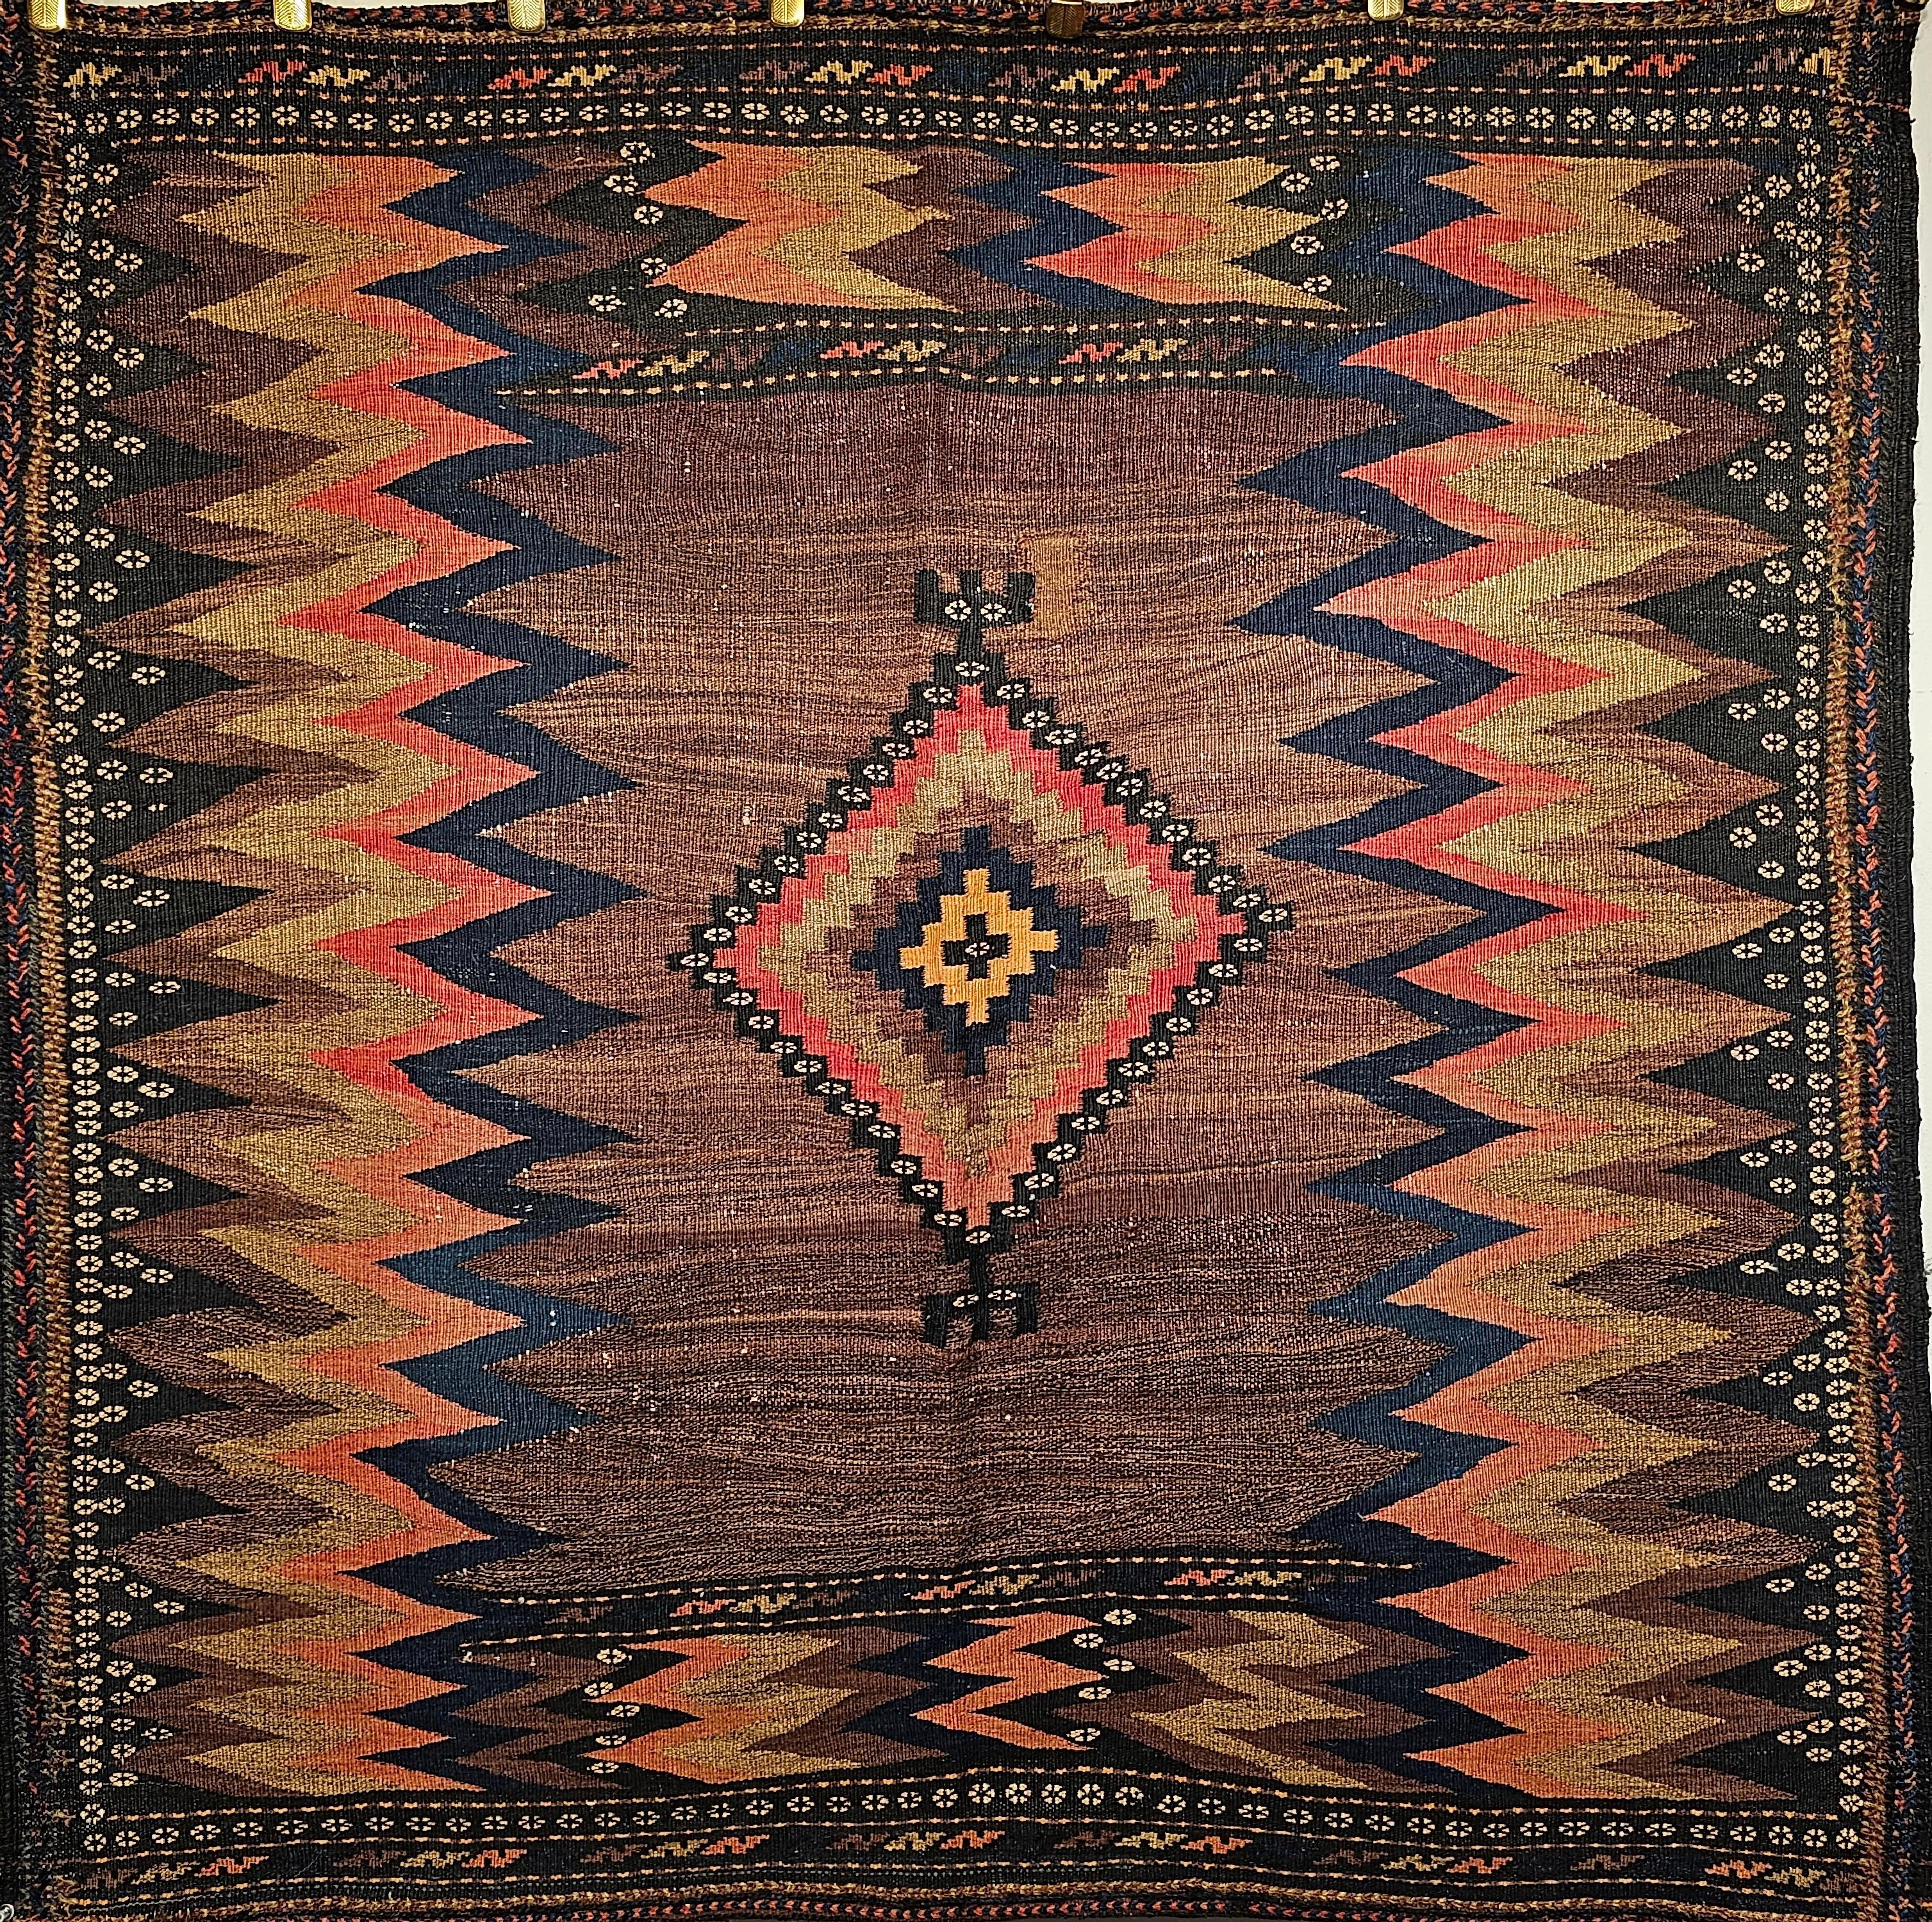  A very rare Persian Tribal Sofreh Kilim from the early 1900s.  The handwoven tribal kilim is from the Qashqai tribes in Southwest Persia.  It is a very desirable square-size tribal kilim with natural organic dyes.  The Sofreh Kilim was mostly woven